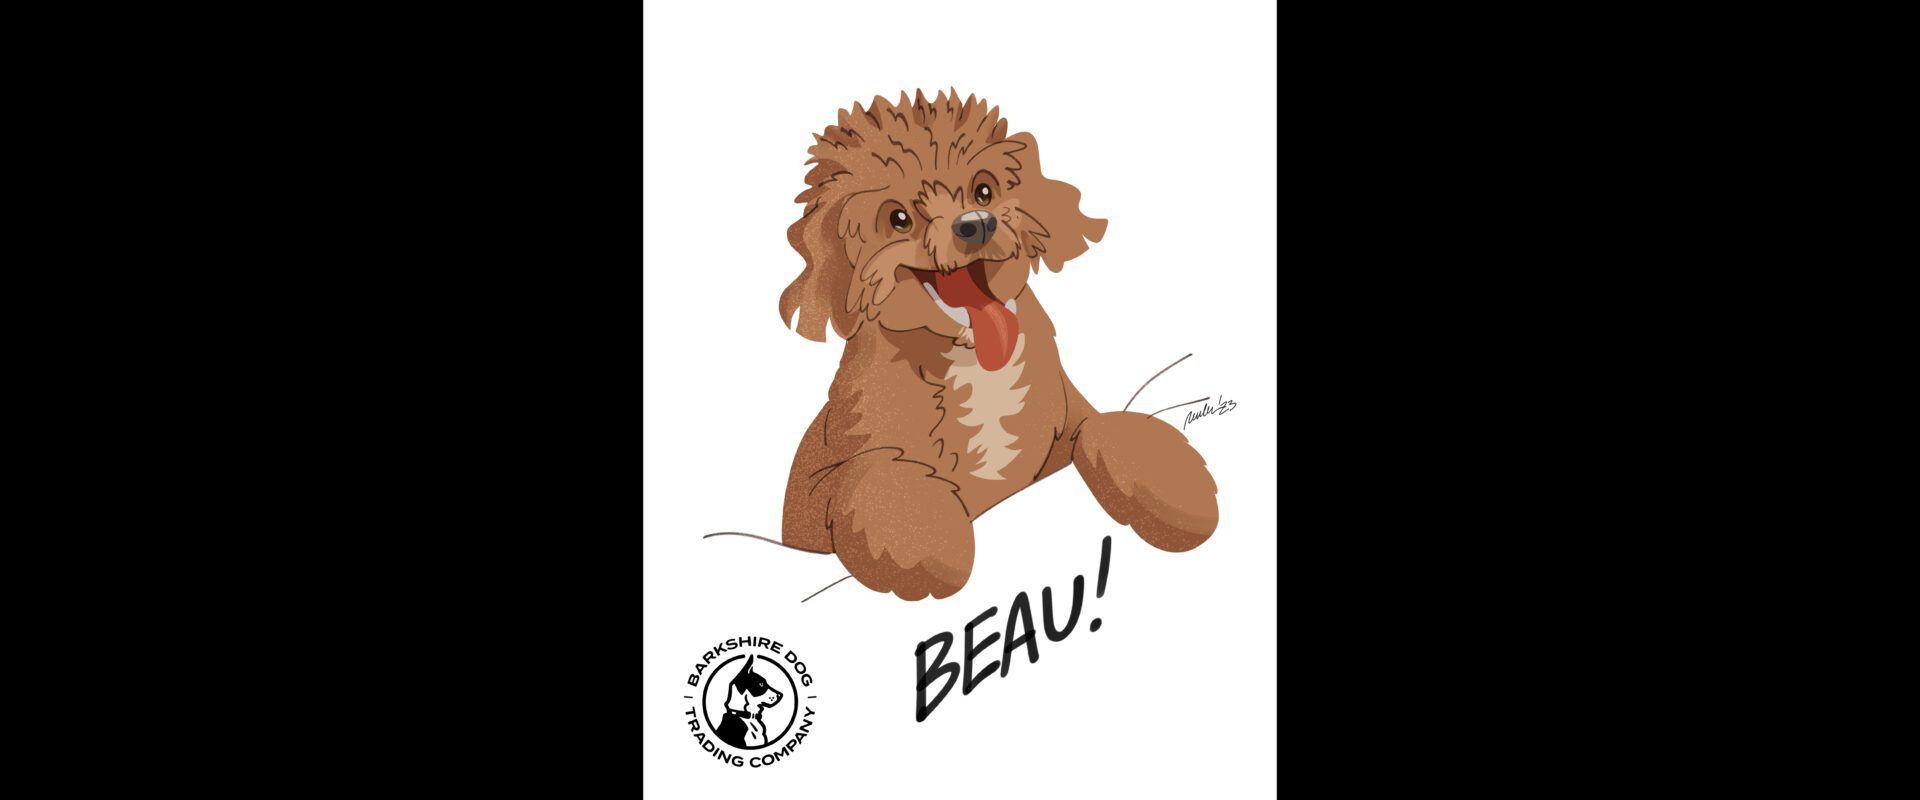 Line drawing of brown dog with Barkshire Dog Trading Company logo and "Beau!"